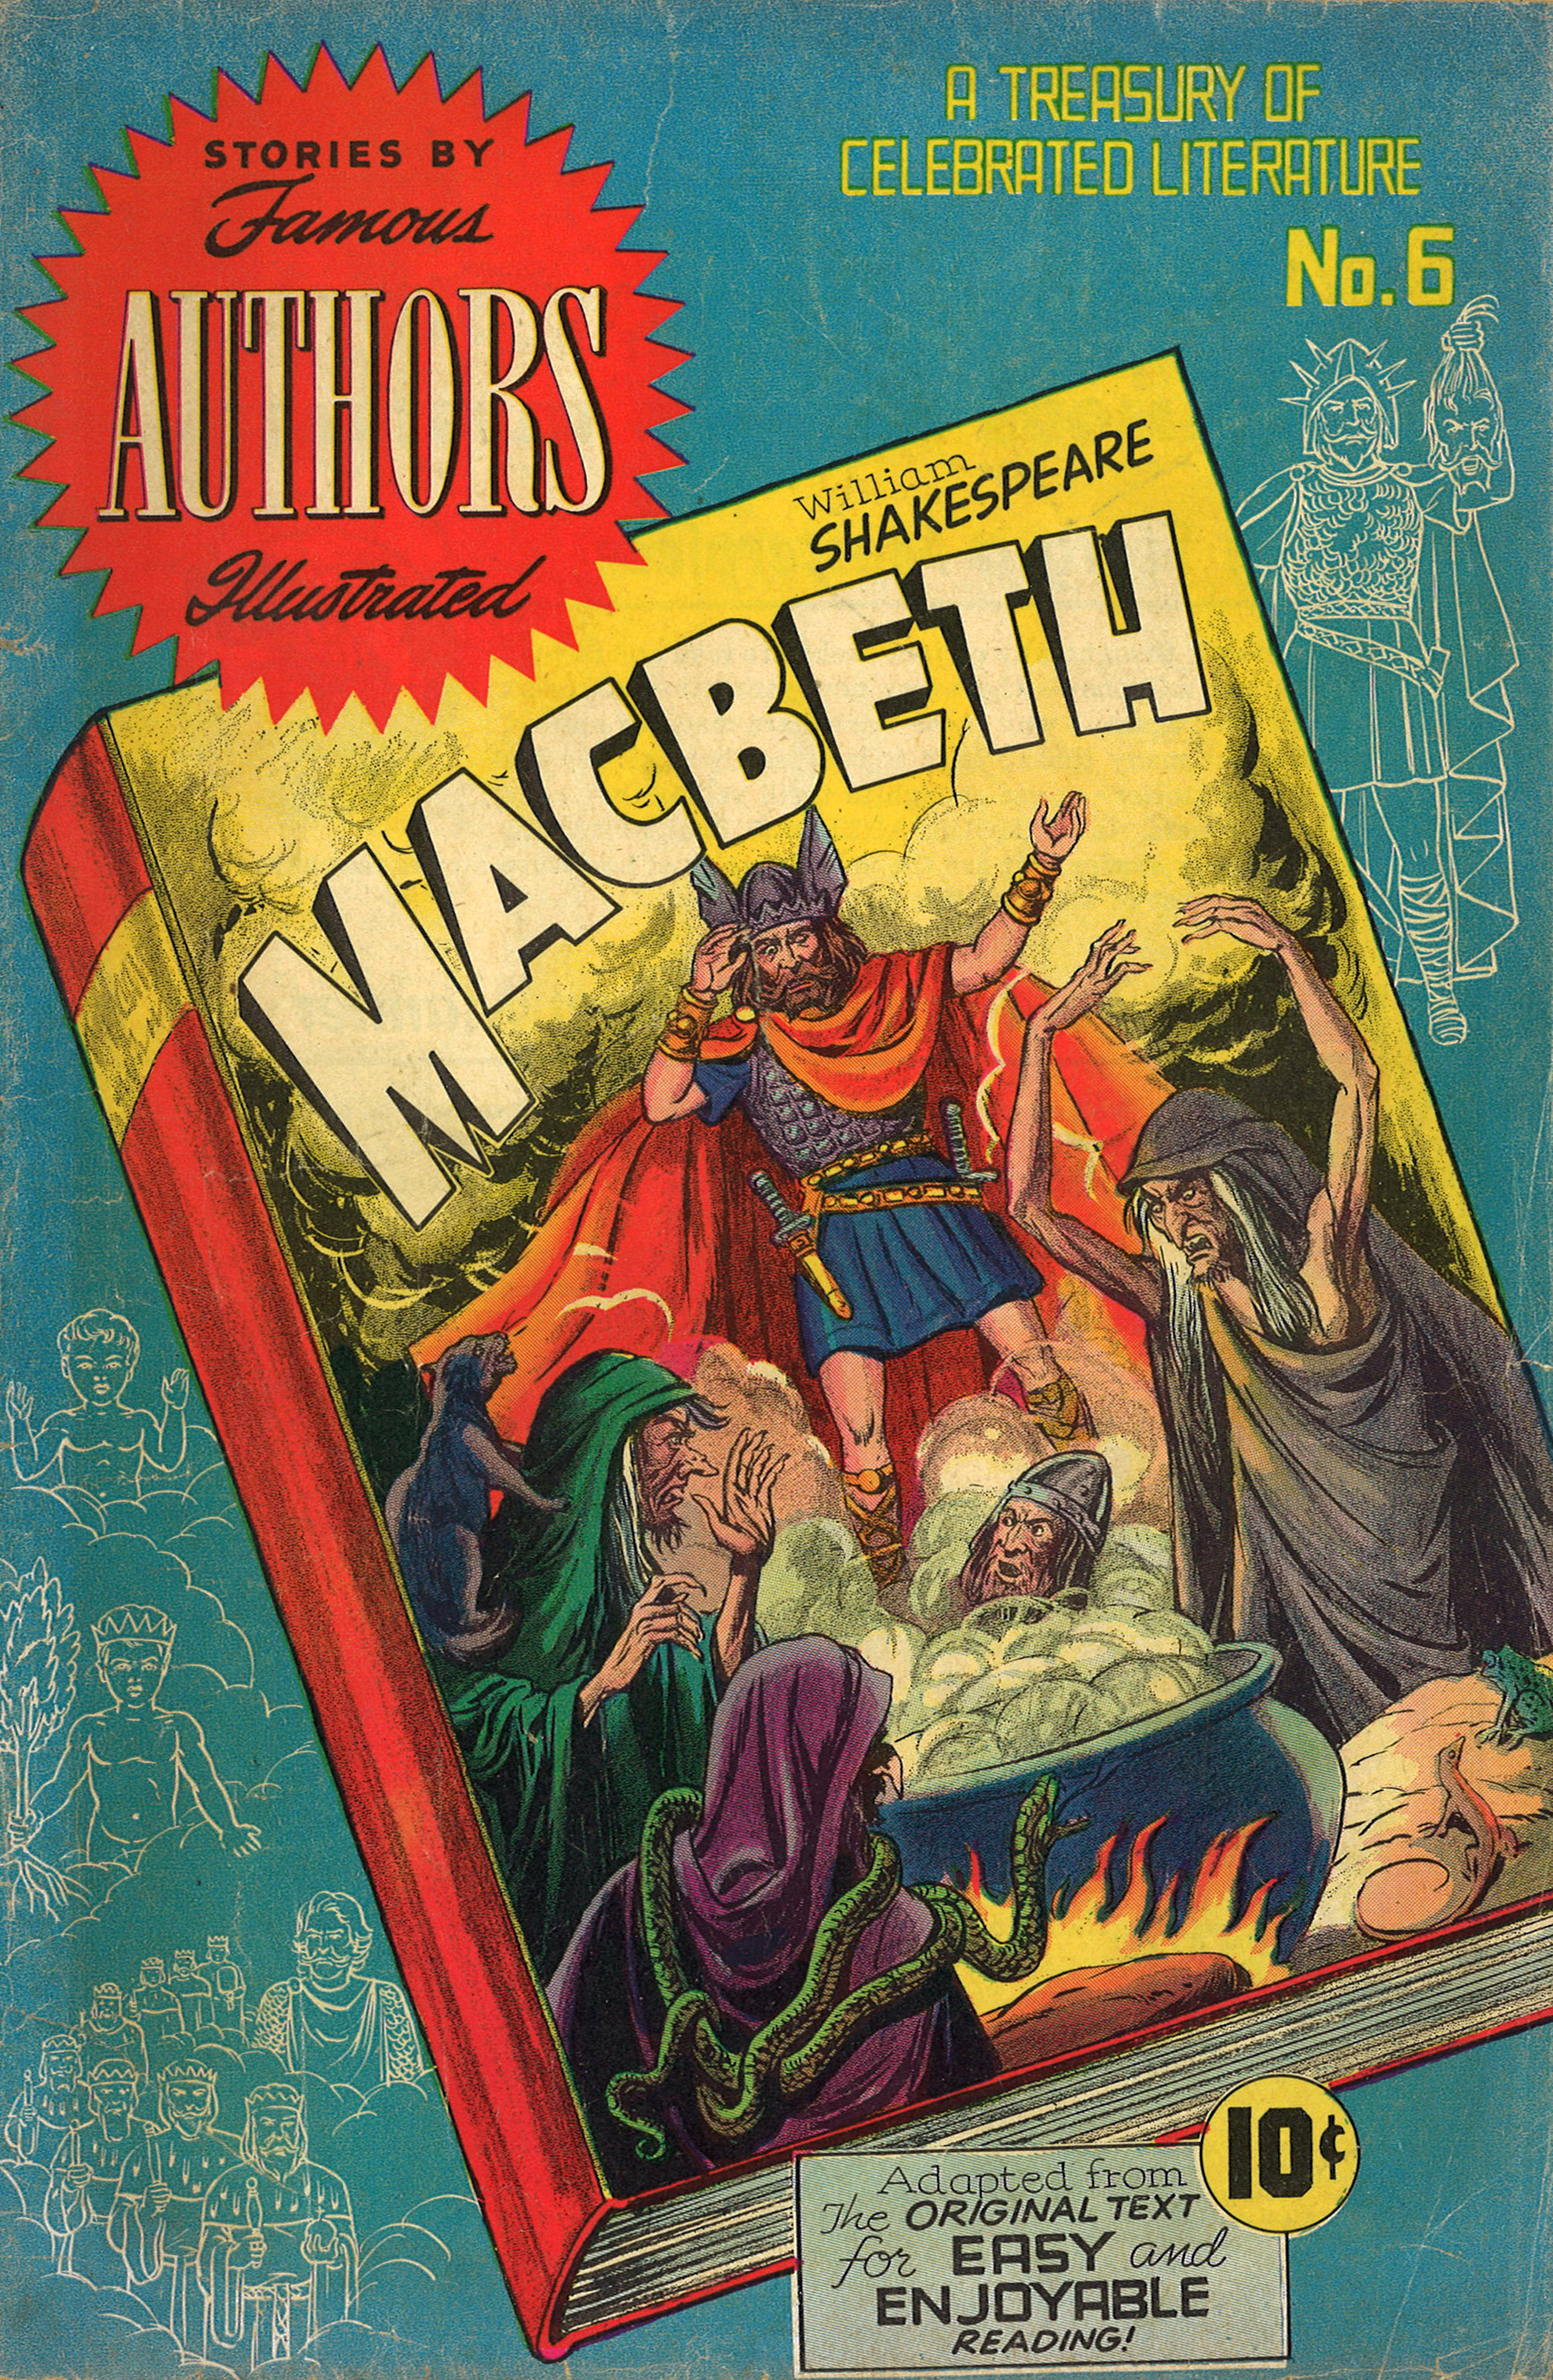 Cover of 1950 Famous Authors Illustrated comic book version of Shakepeare's Macbeth